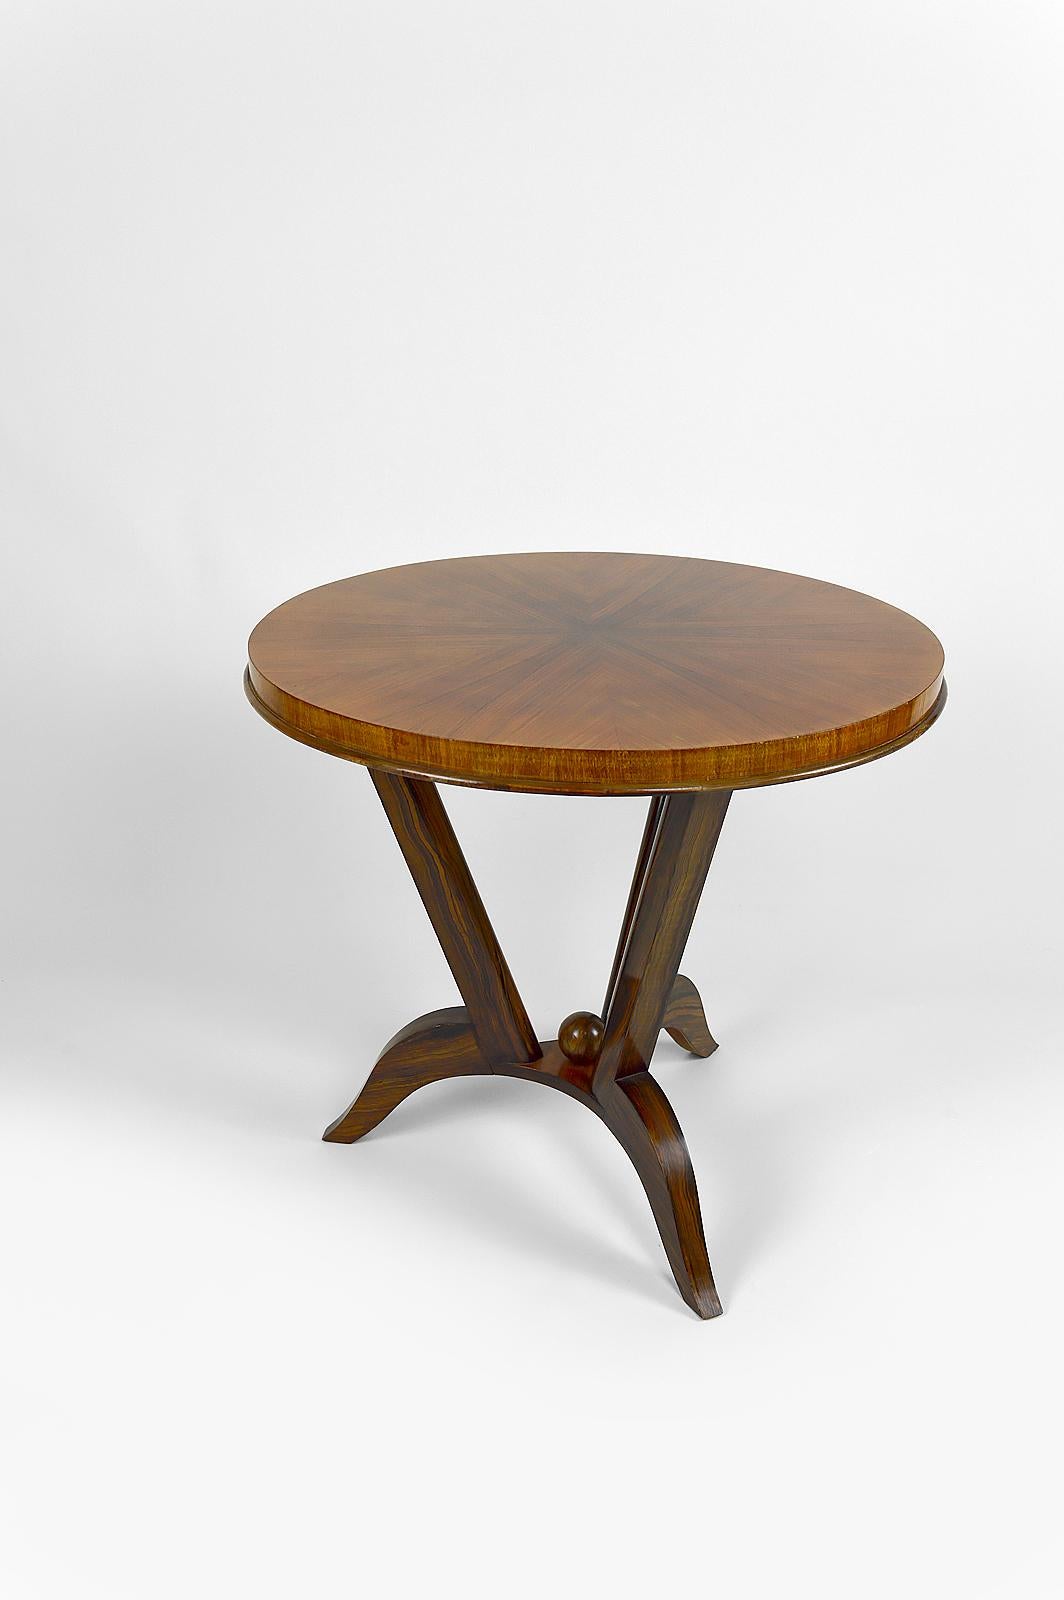 Painted Round Art Deco Trompe-l'Oeil Side Table, France, Circa 1930